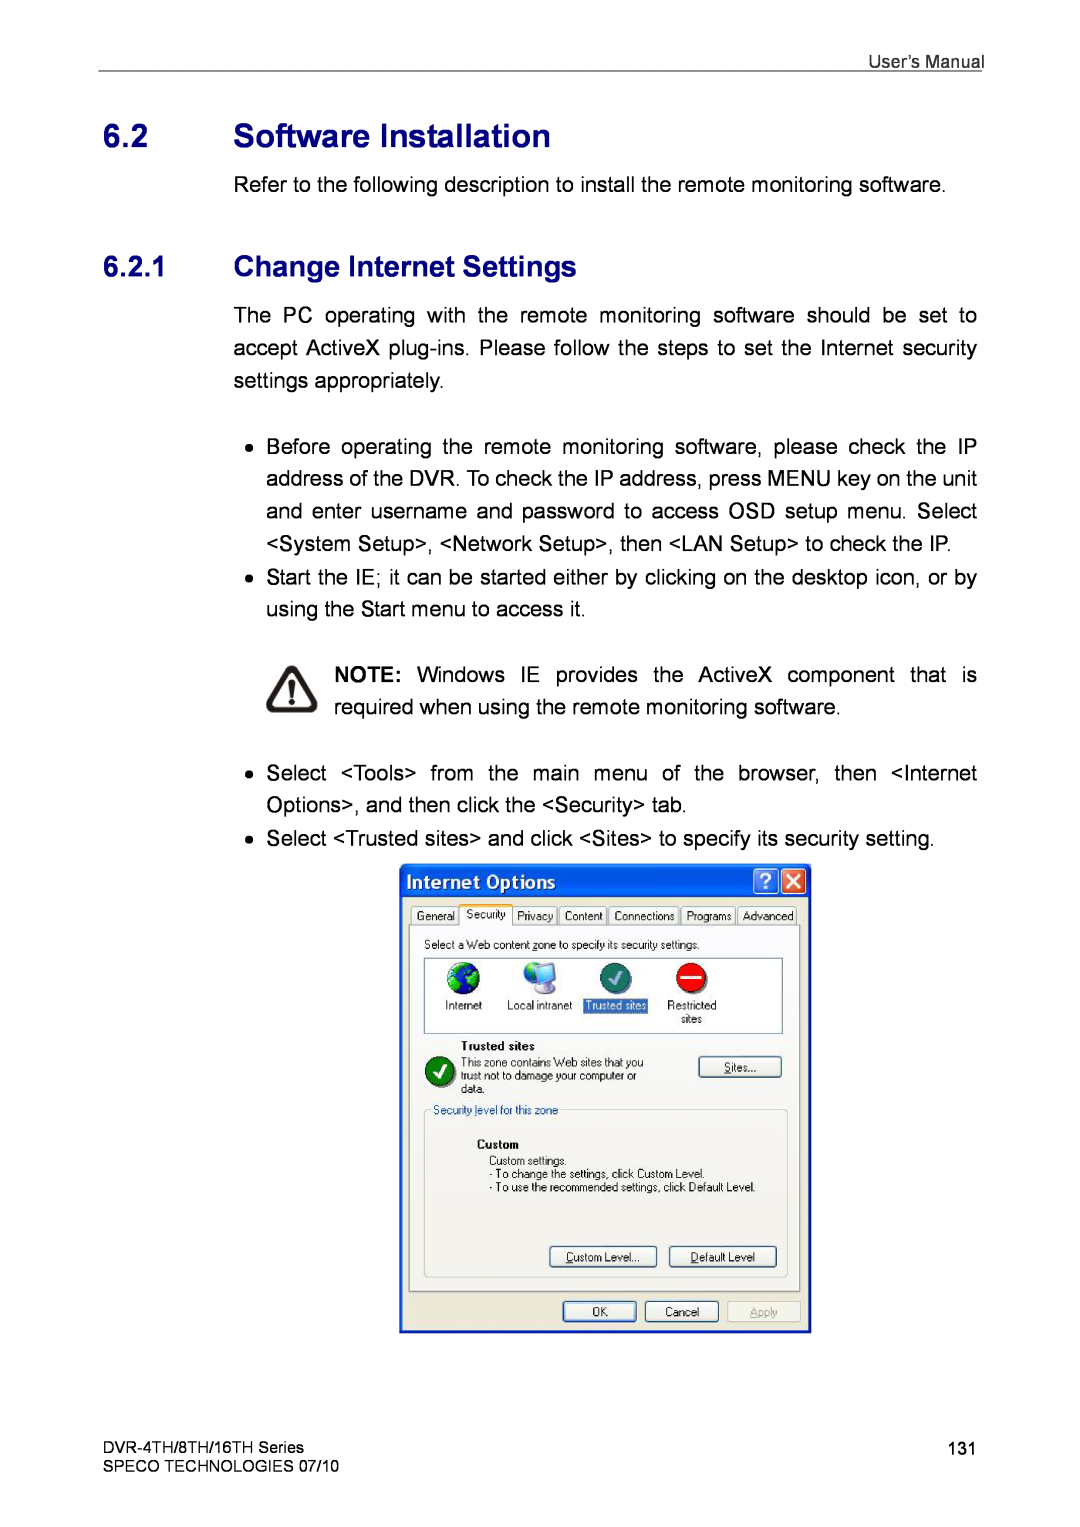 Speco Technologies 8TH, 4TH, 16TH user manual Software Installation, Change Internet Settings 